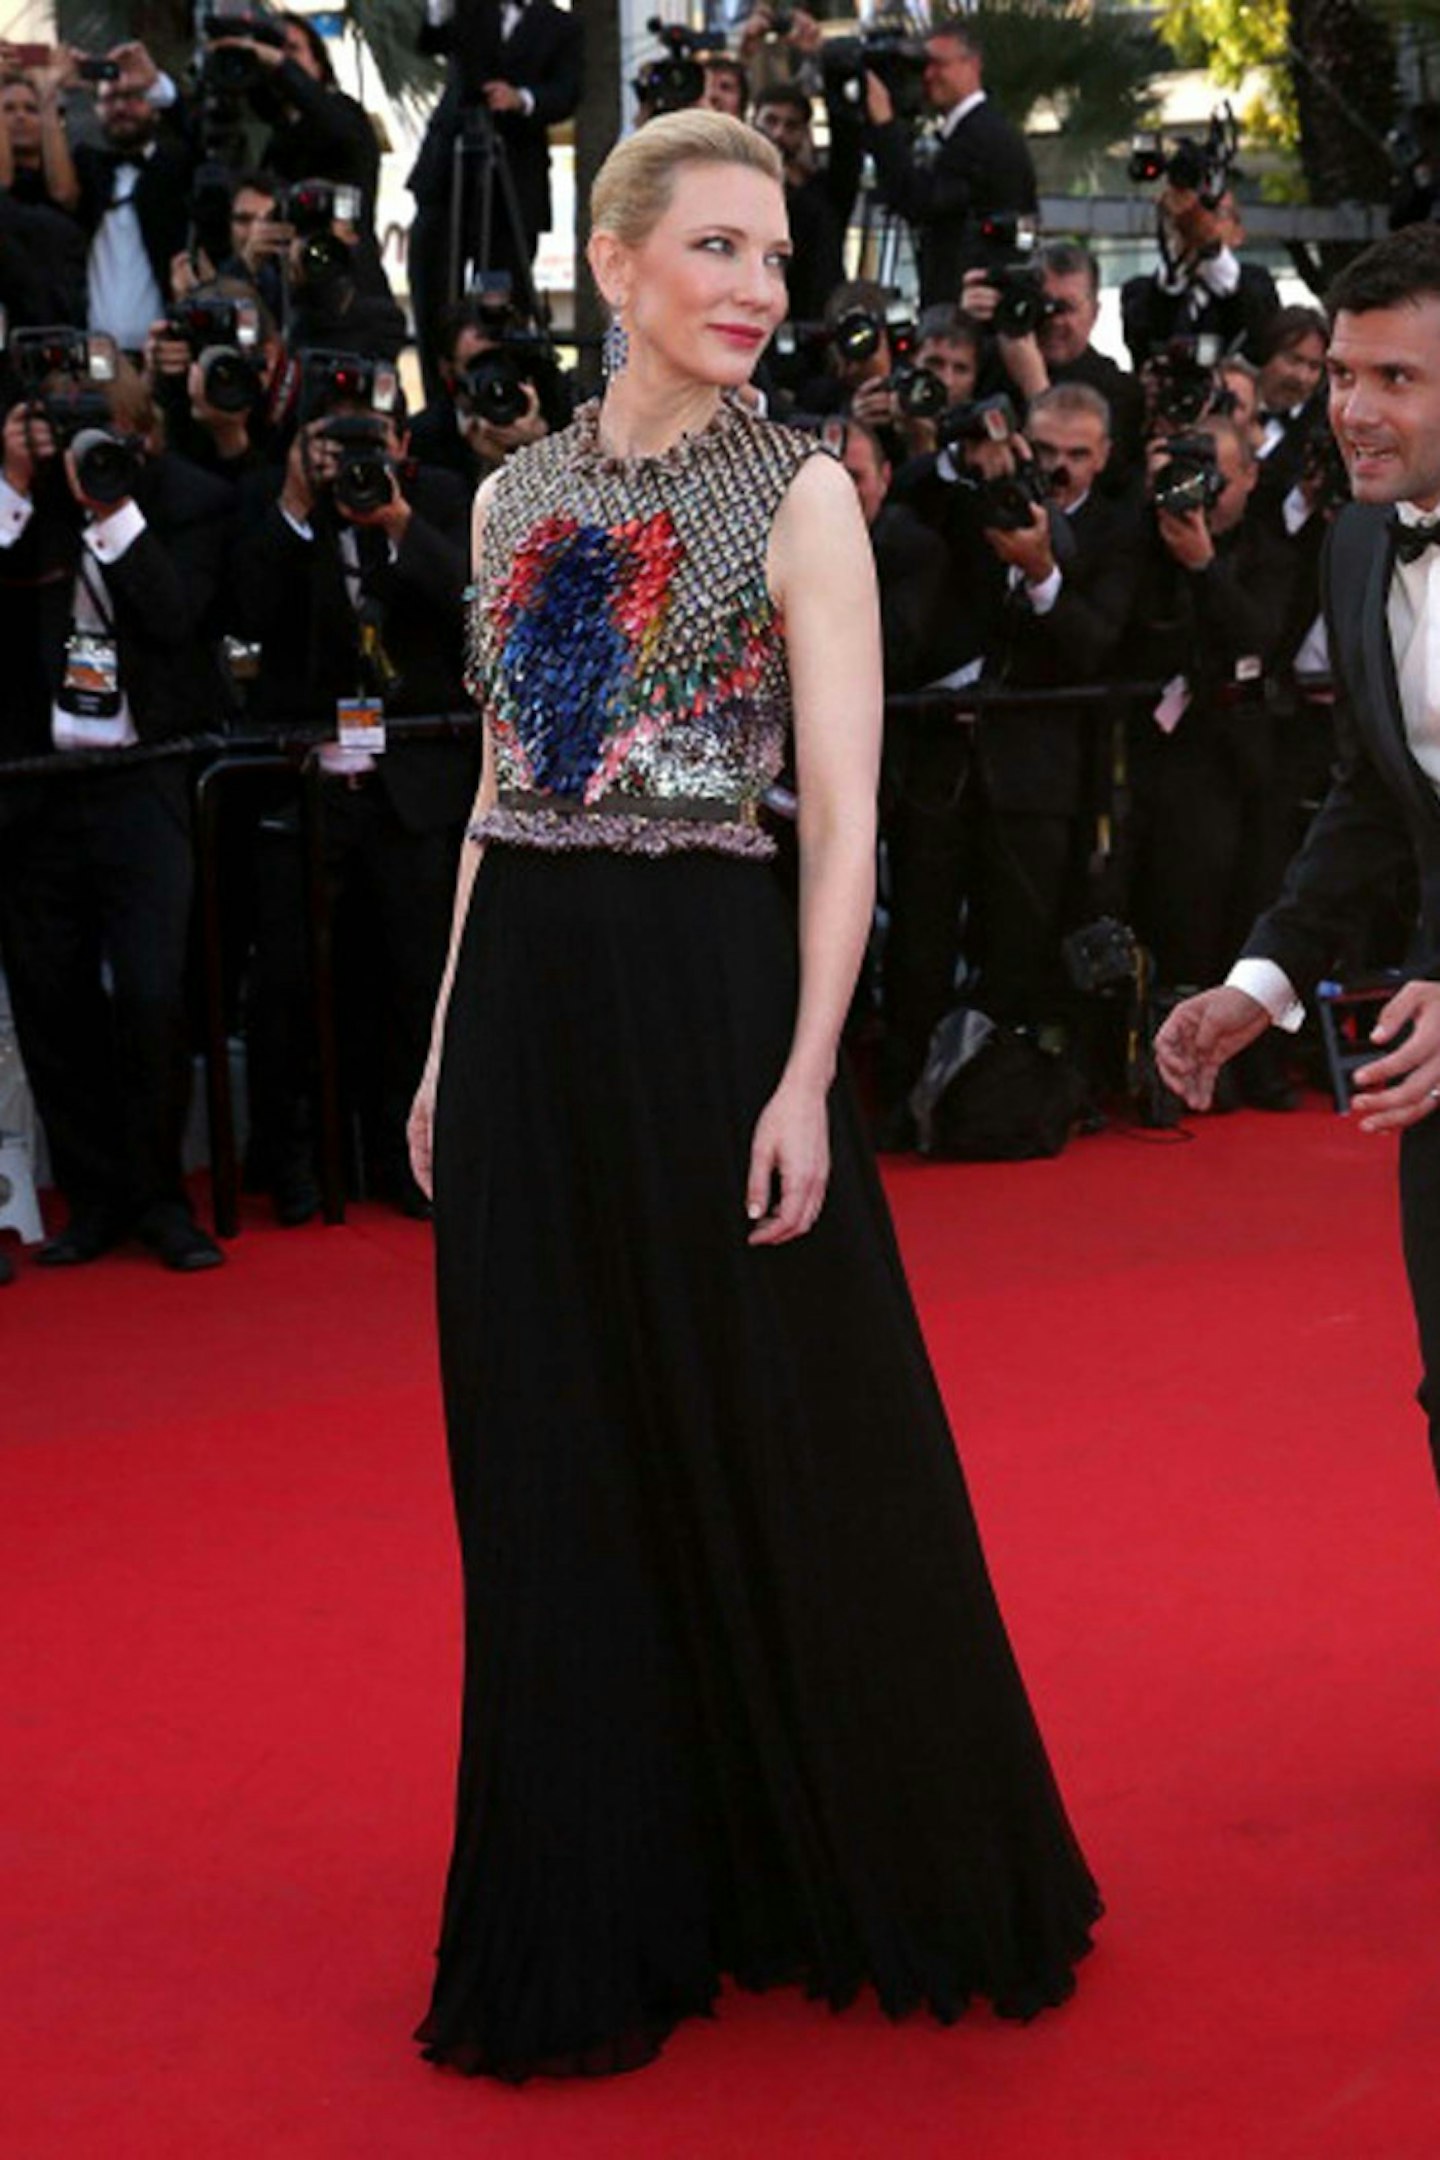 Cate Blanchett Shines in Louis Vuitton Bow Dress at Cannes